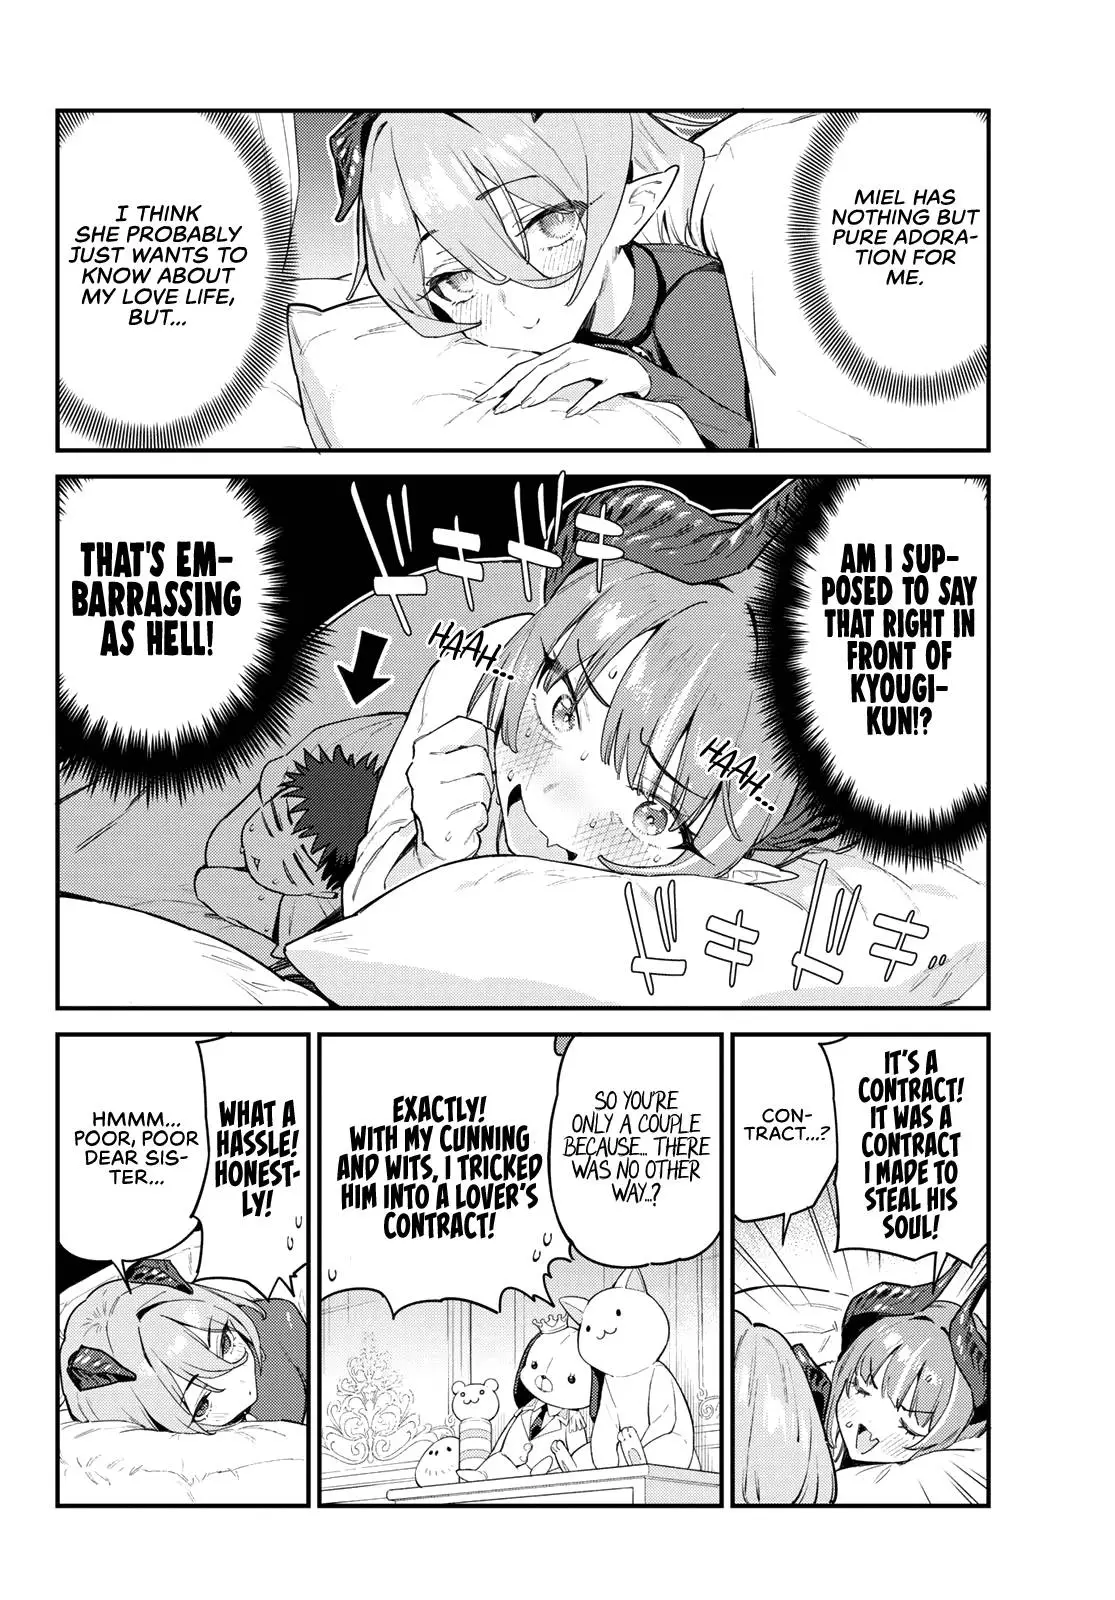 Kanan-Sama Is Easy As Hell! - 41 page 5-5410e8d9